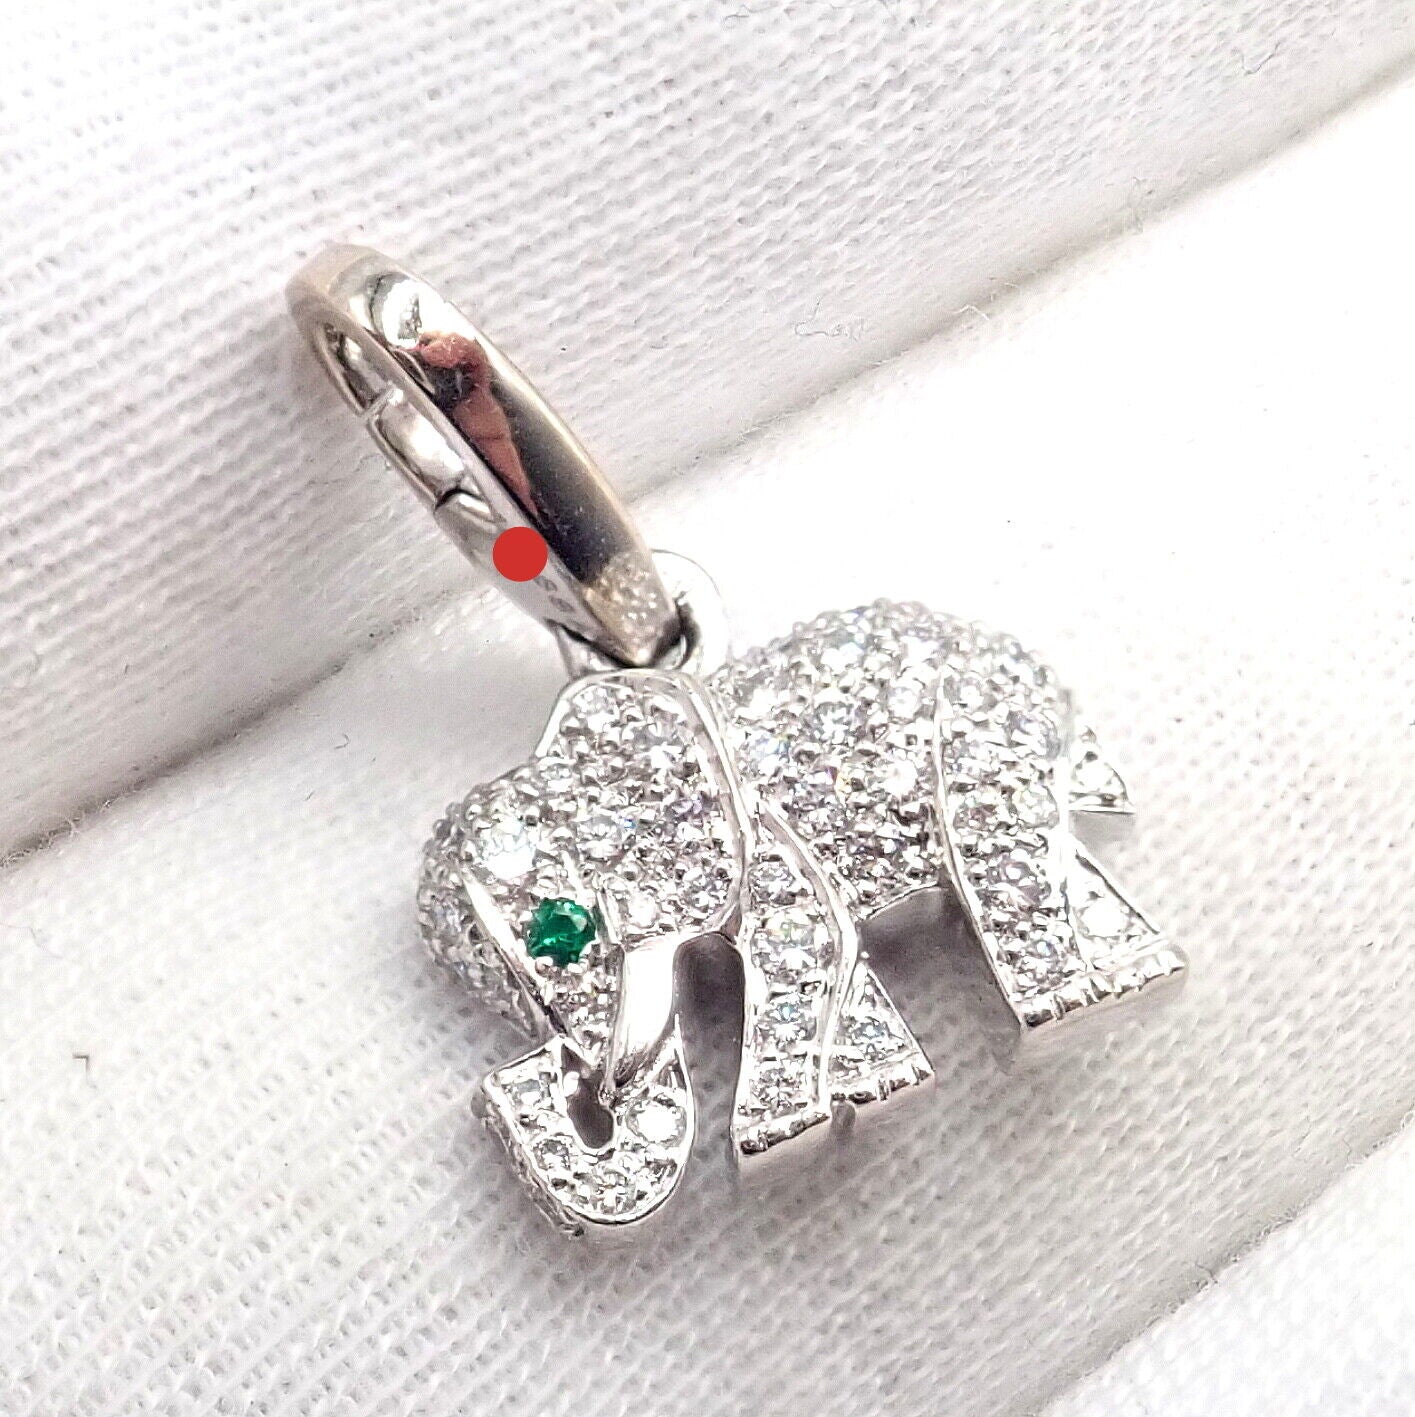 Cartier Jewelry & Watches:Fine Jewelry:Necklaces & Pendants Authentic Cartier Elephant 18k White Gold Diamond Emerald Charm Pendant + Papers